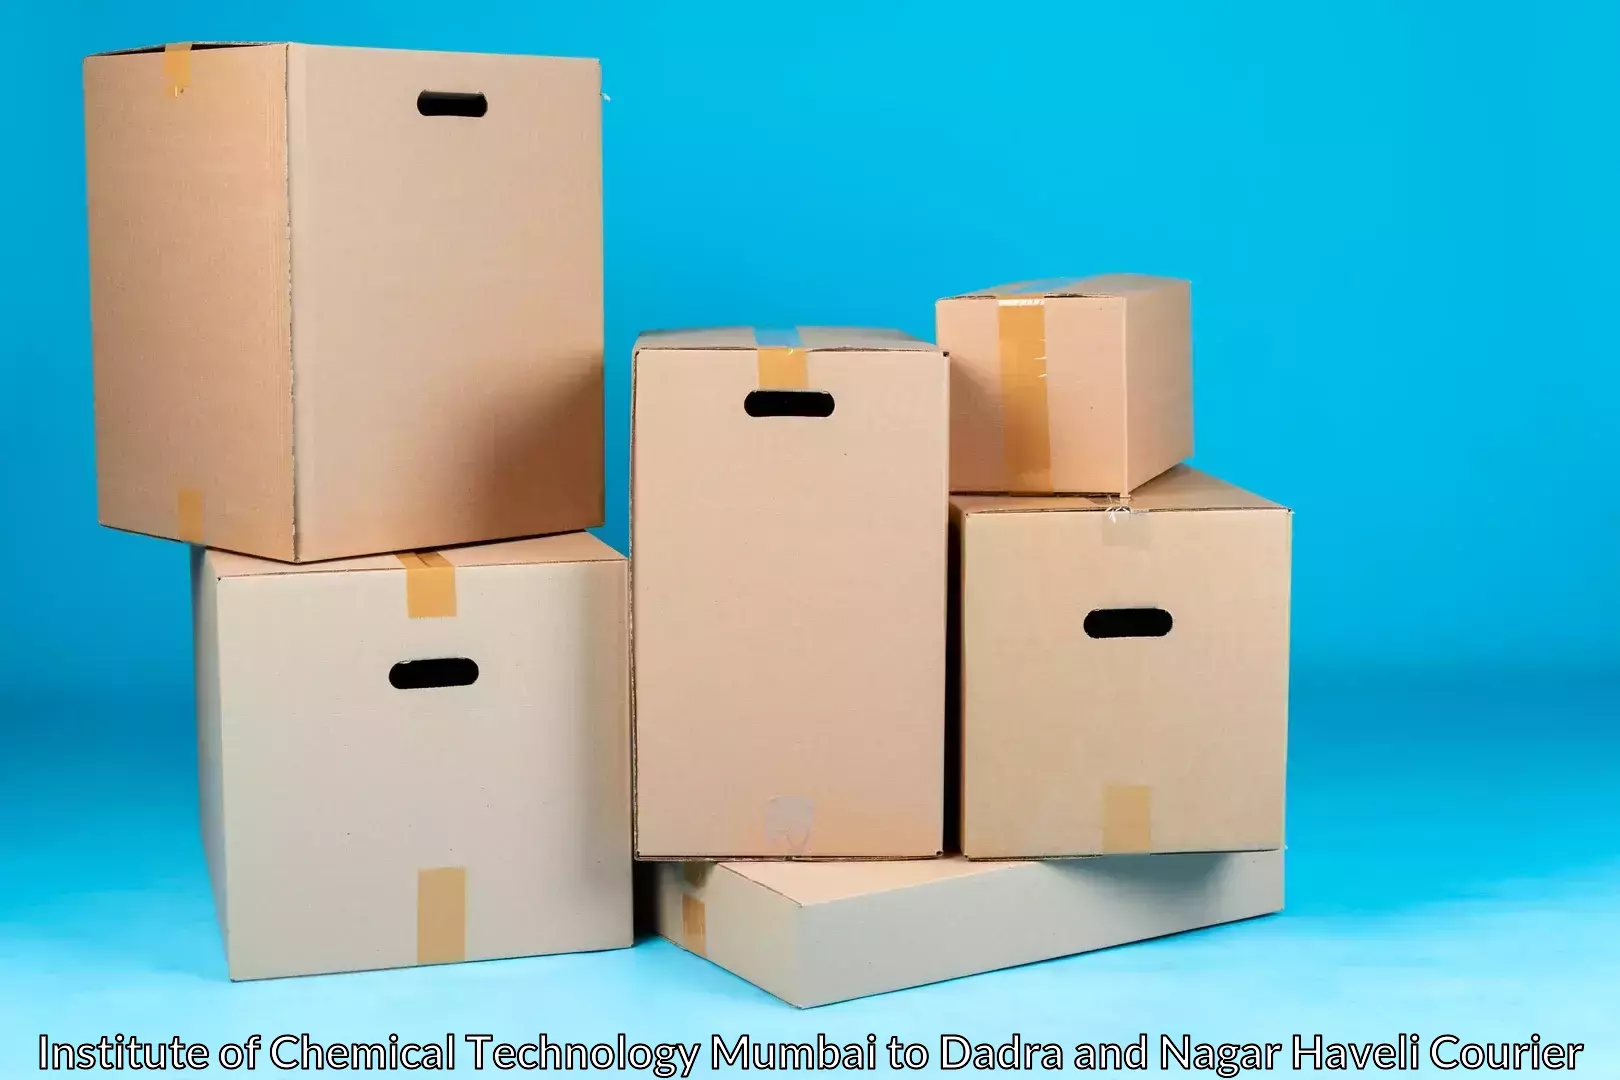 Quality relocation assistance Institute of Chemical Technology Mumbai to Silvassa